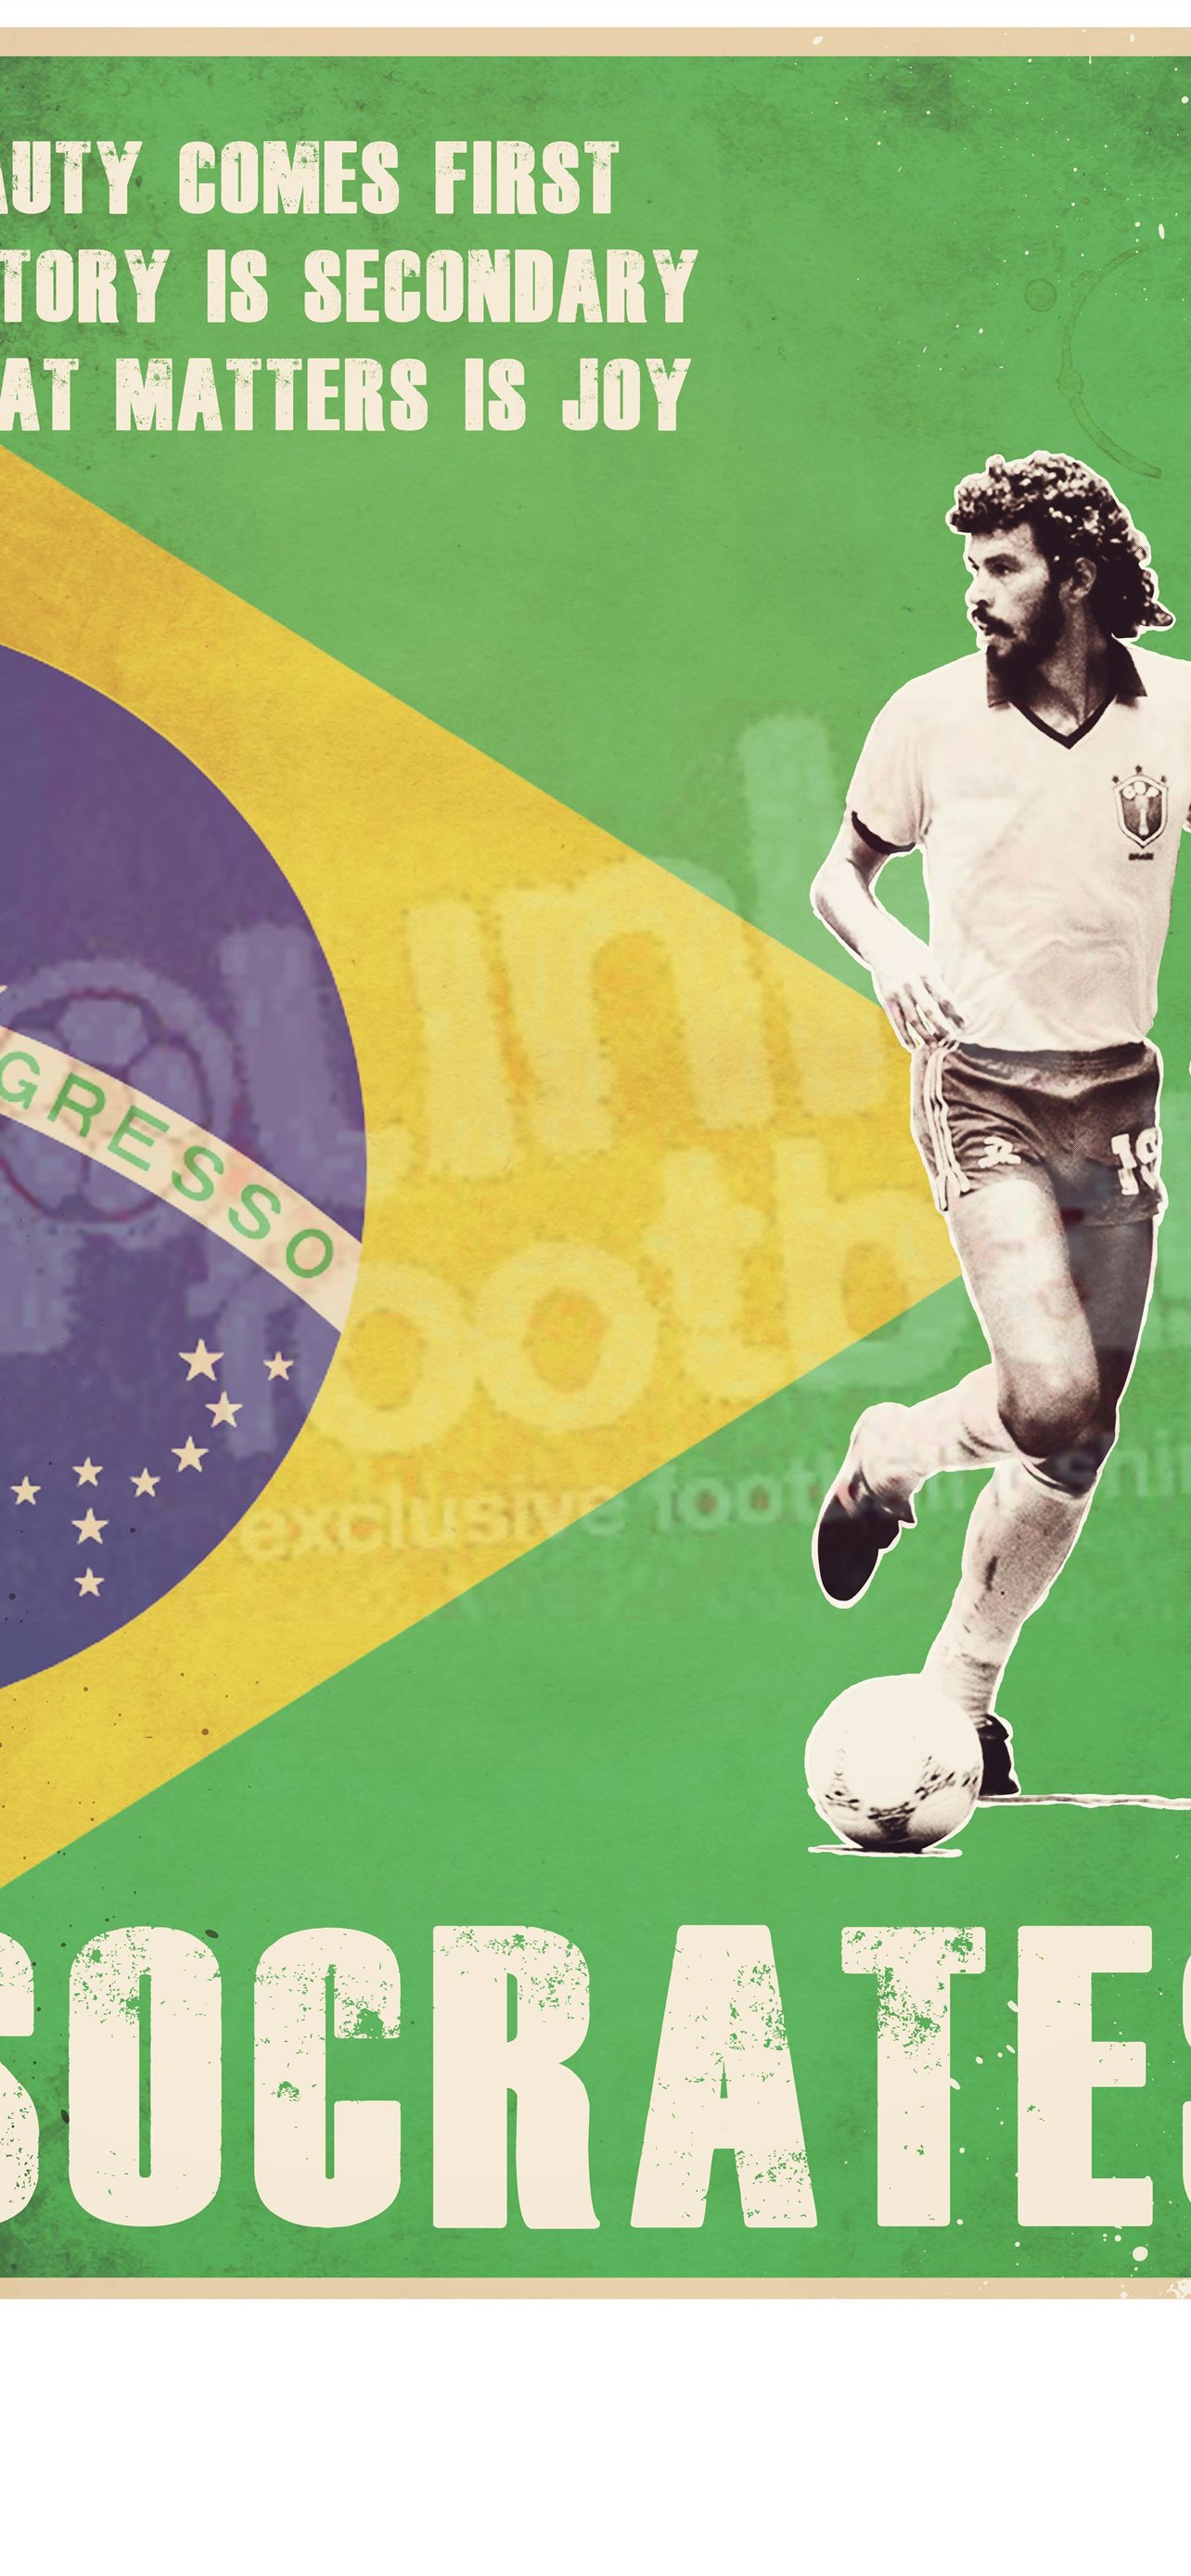 62+ Brazil Soccer Wallpapers: HD, 4K, 5K for PC and Mobile | Download free  images for iPhone, Android